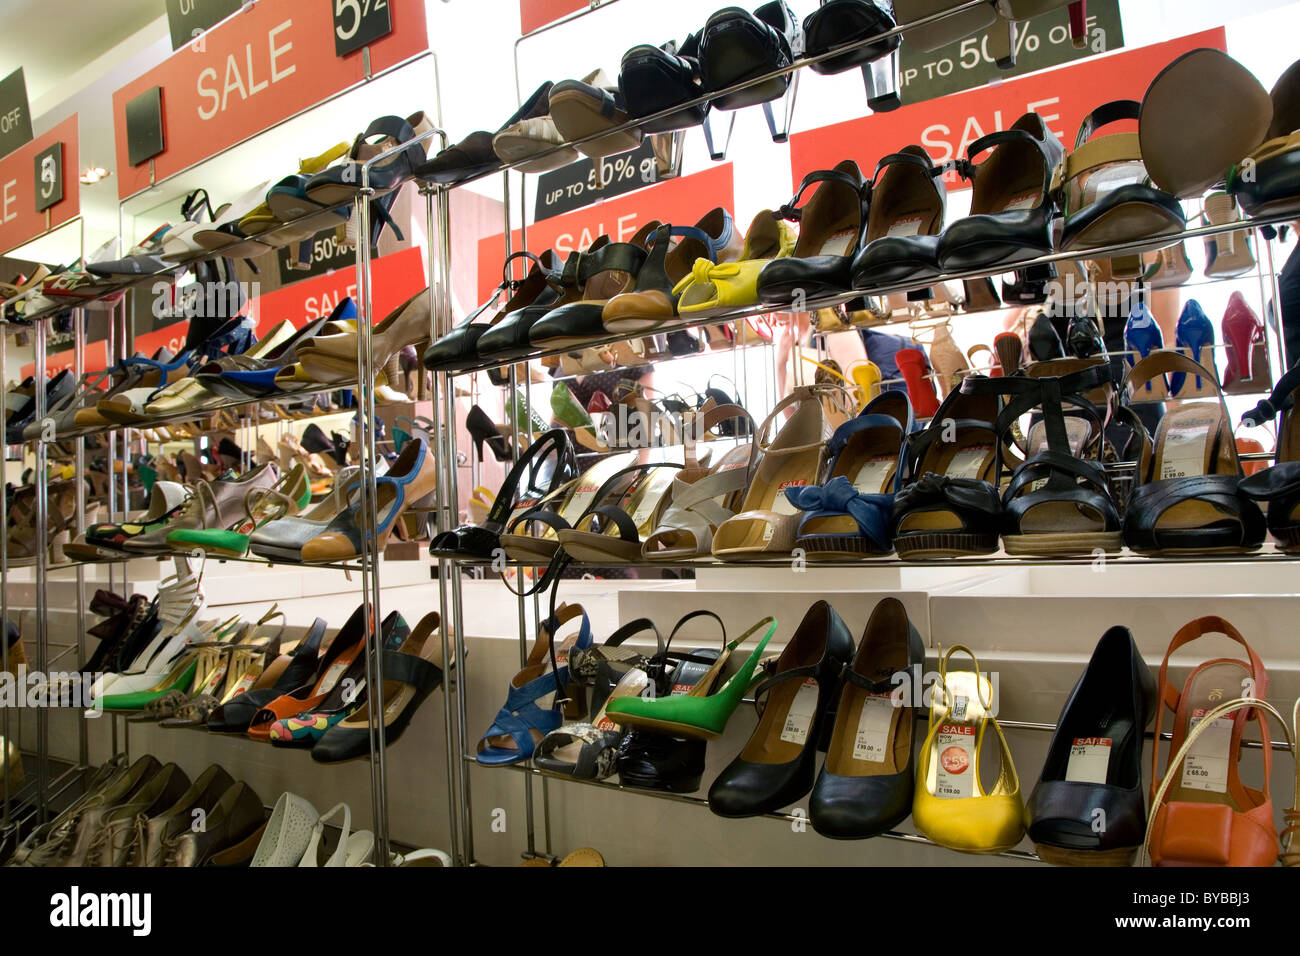 Rack of ladies shoes in a sale Stock 